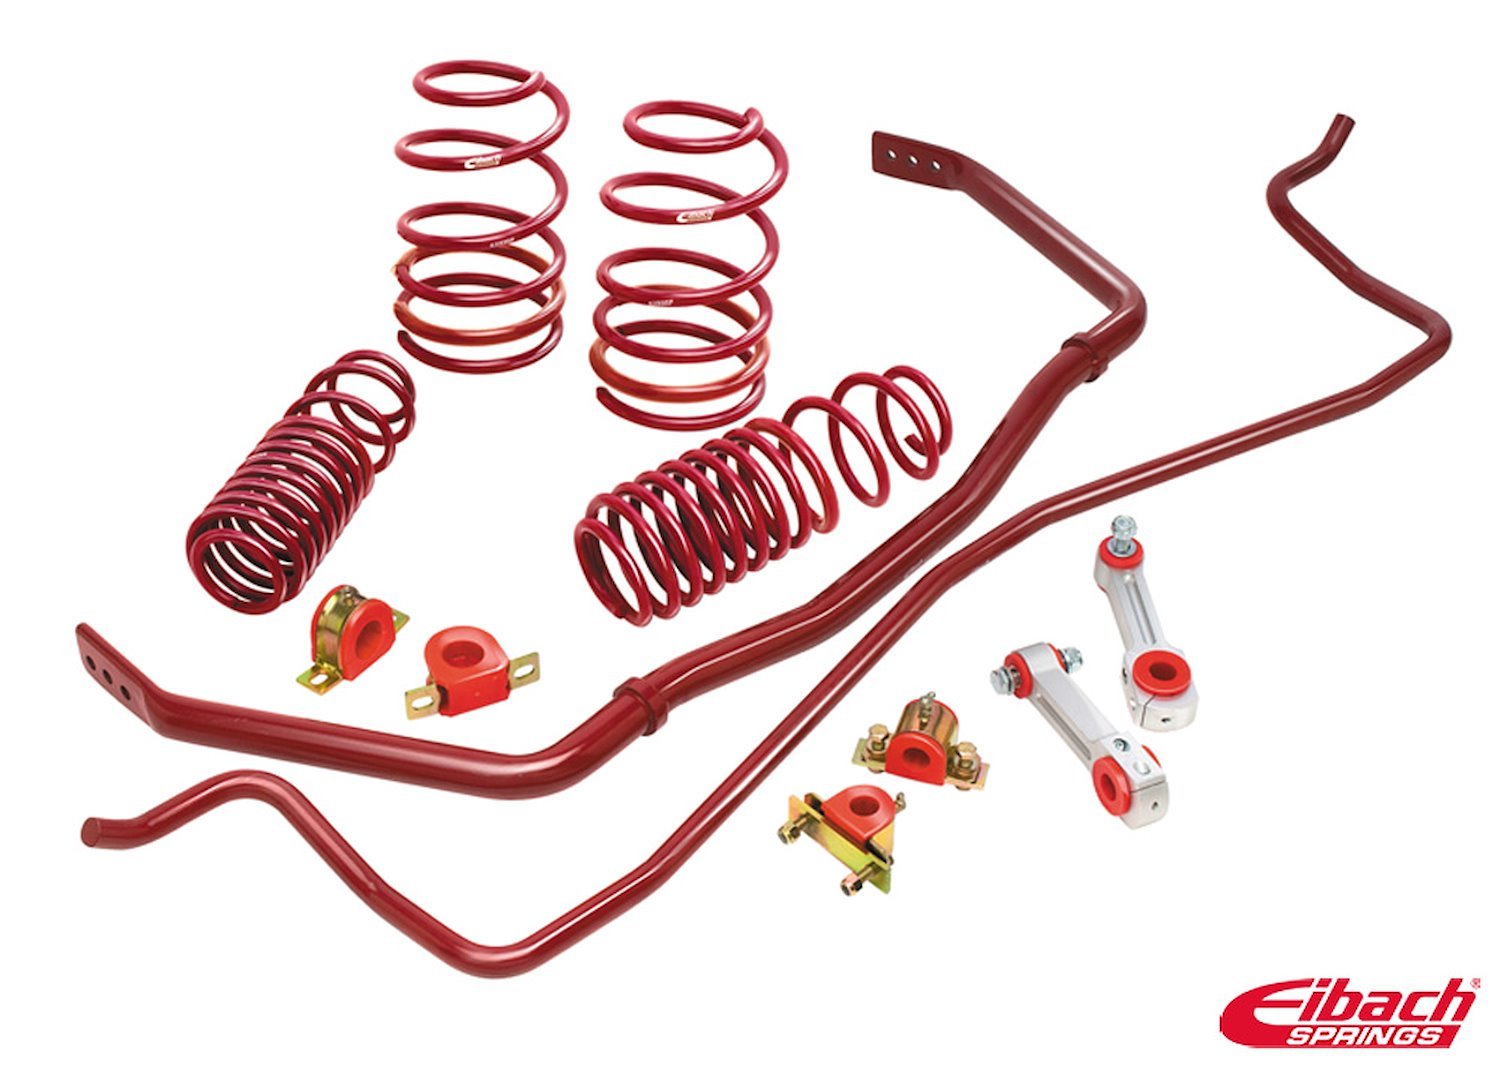 4.13035.880 Sport-Plus Suspension System 2011-12 Mustang Shelby GT500 Coupe - 1.2" Front/1.7" Rear Drop